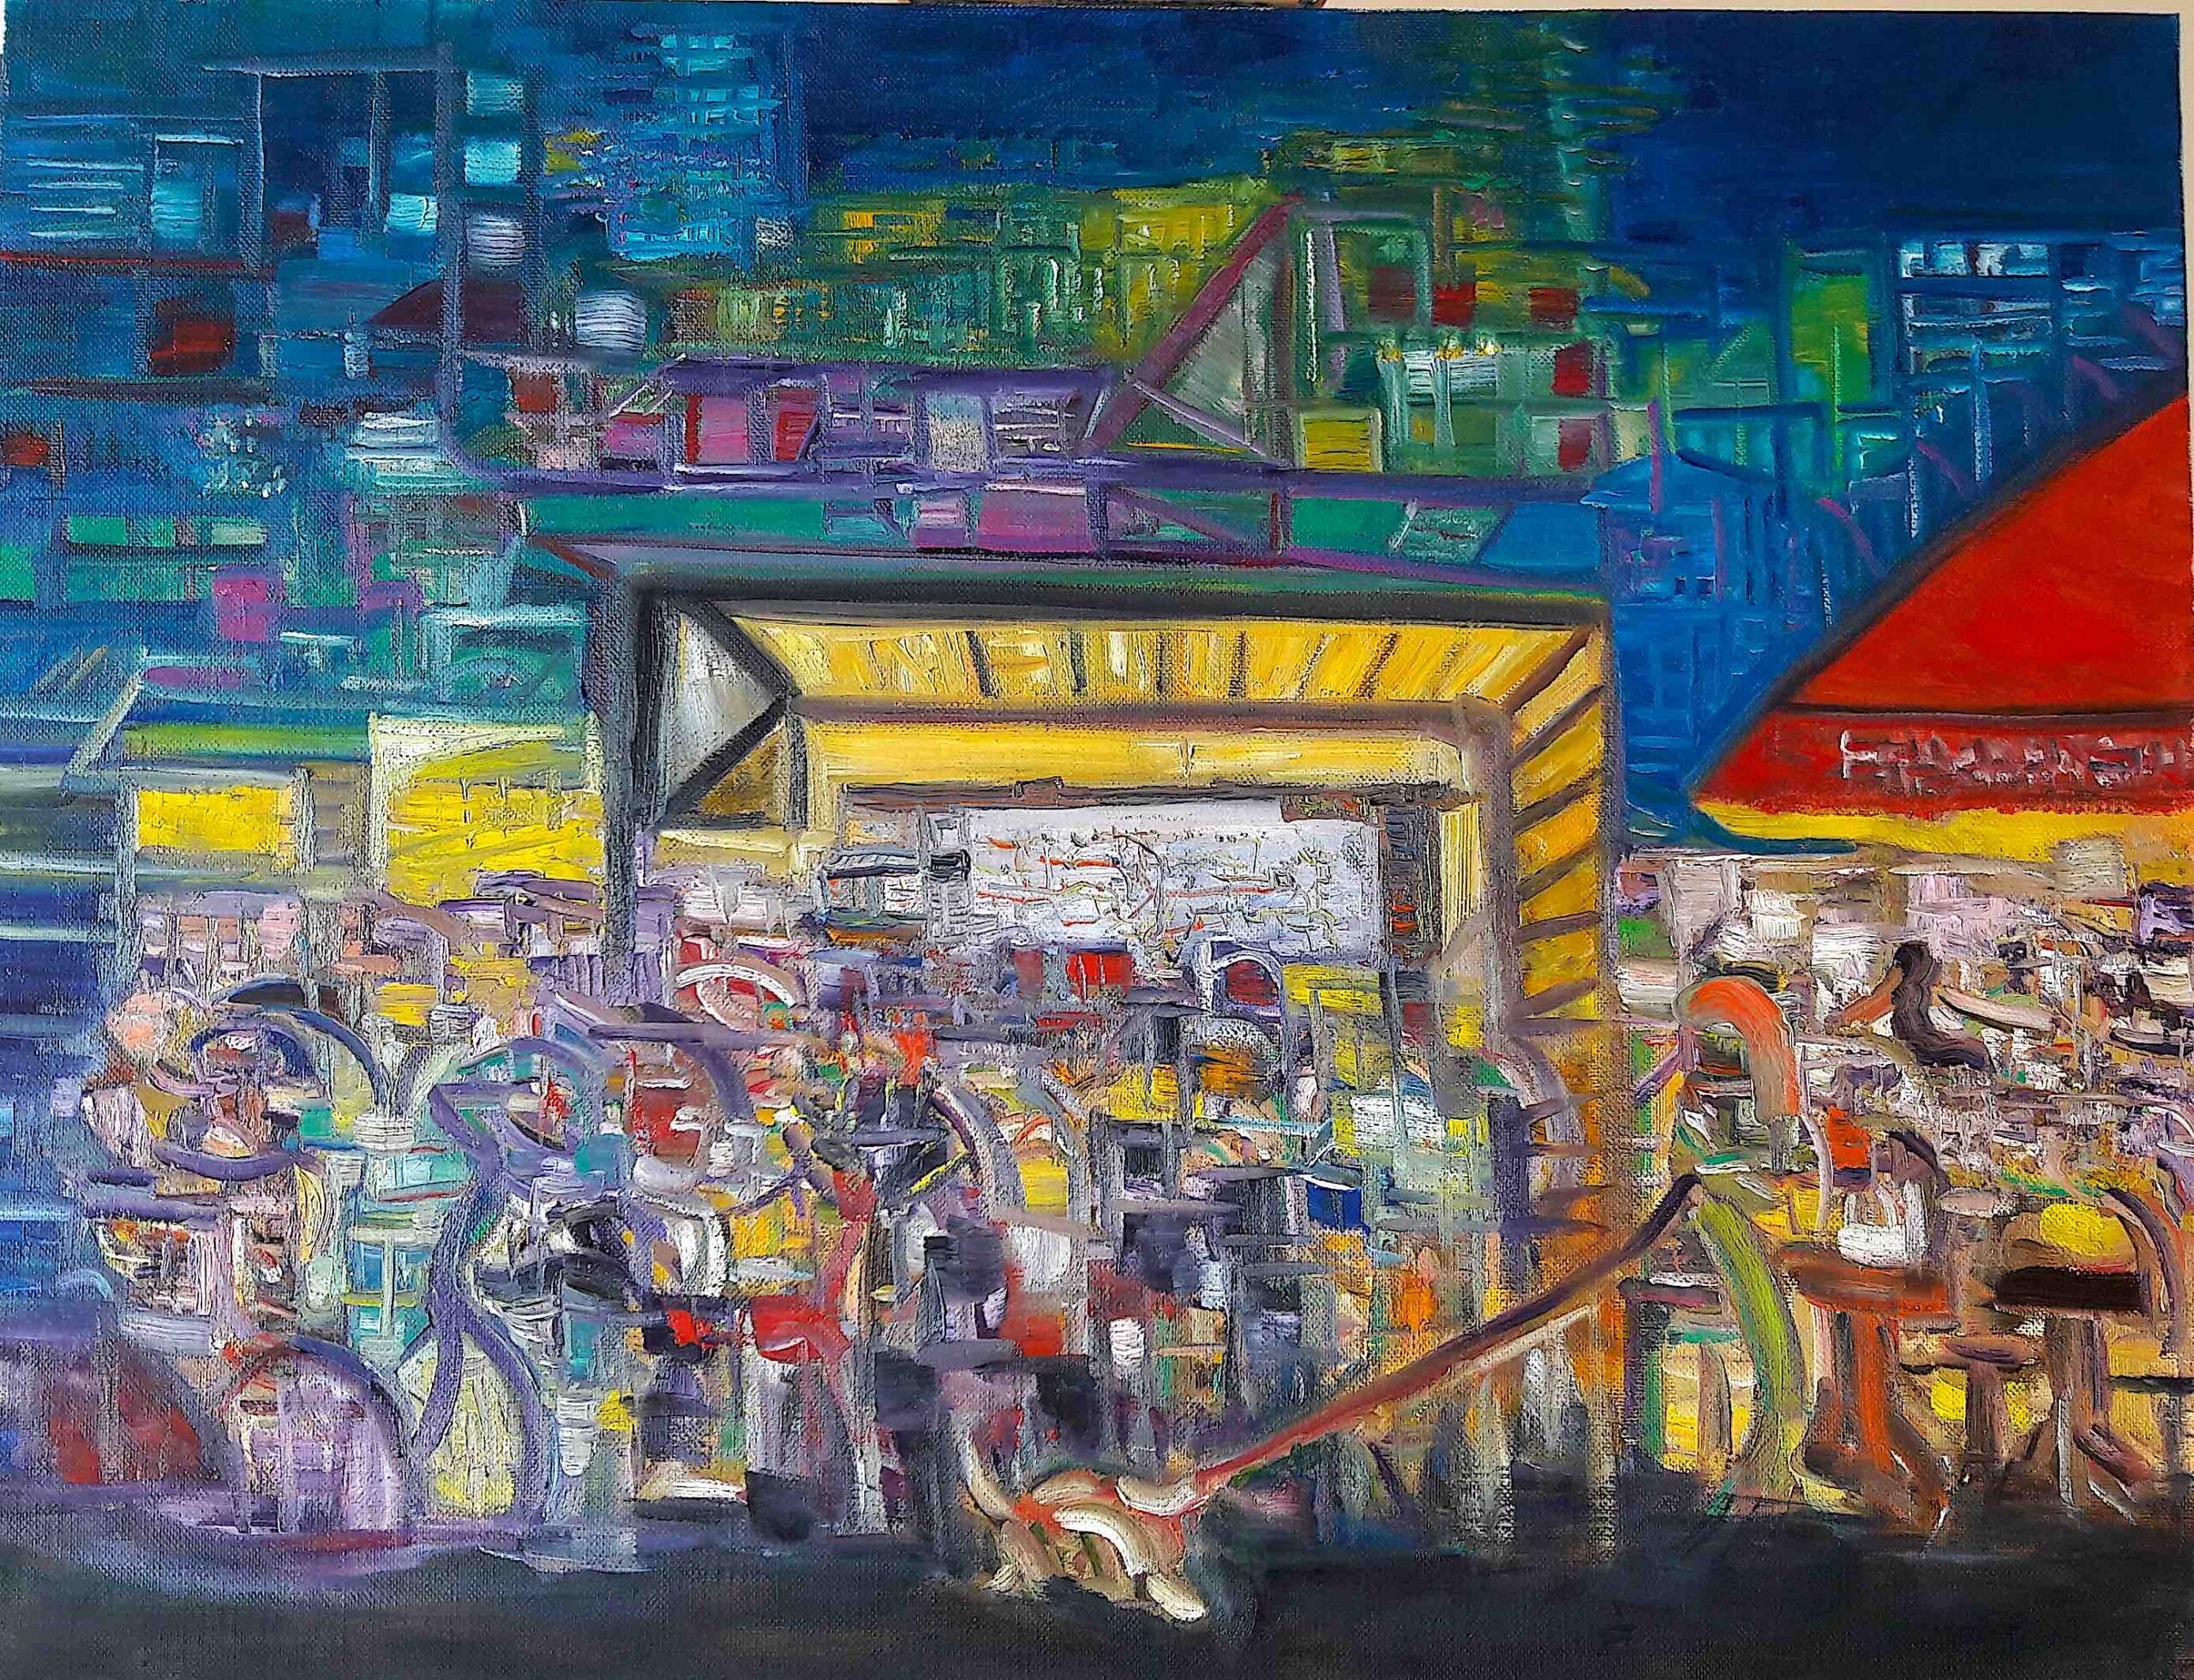 painting of a crowded bus stop at night in the city, by Samuel Rondiere a.k.a. Sam Elka